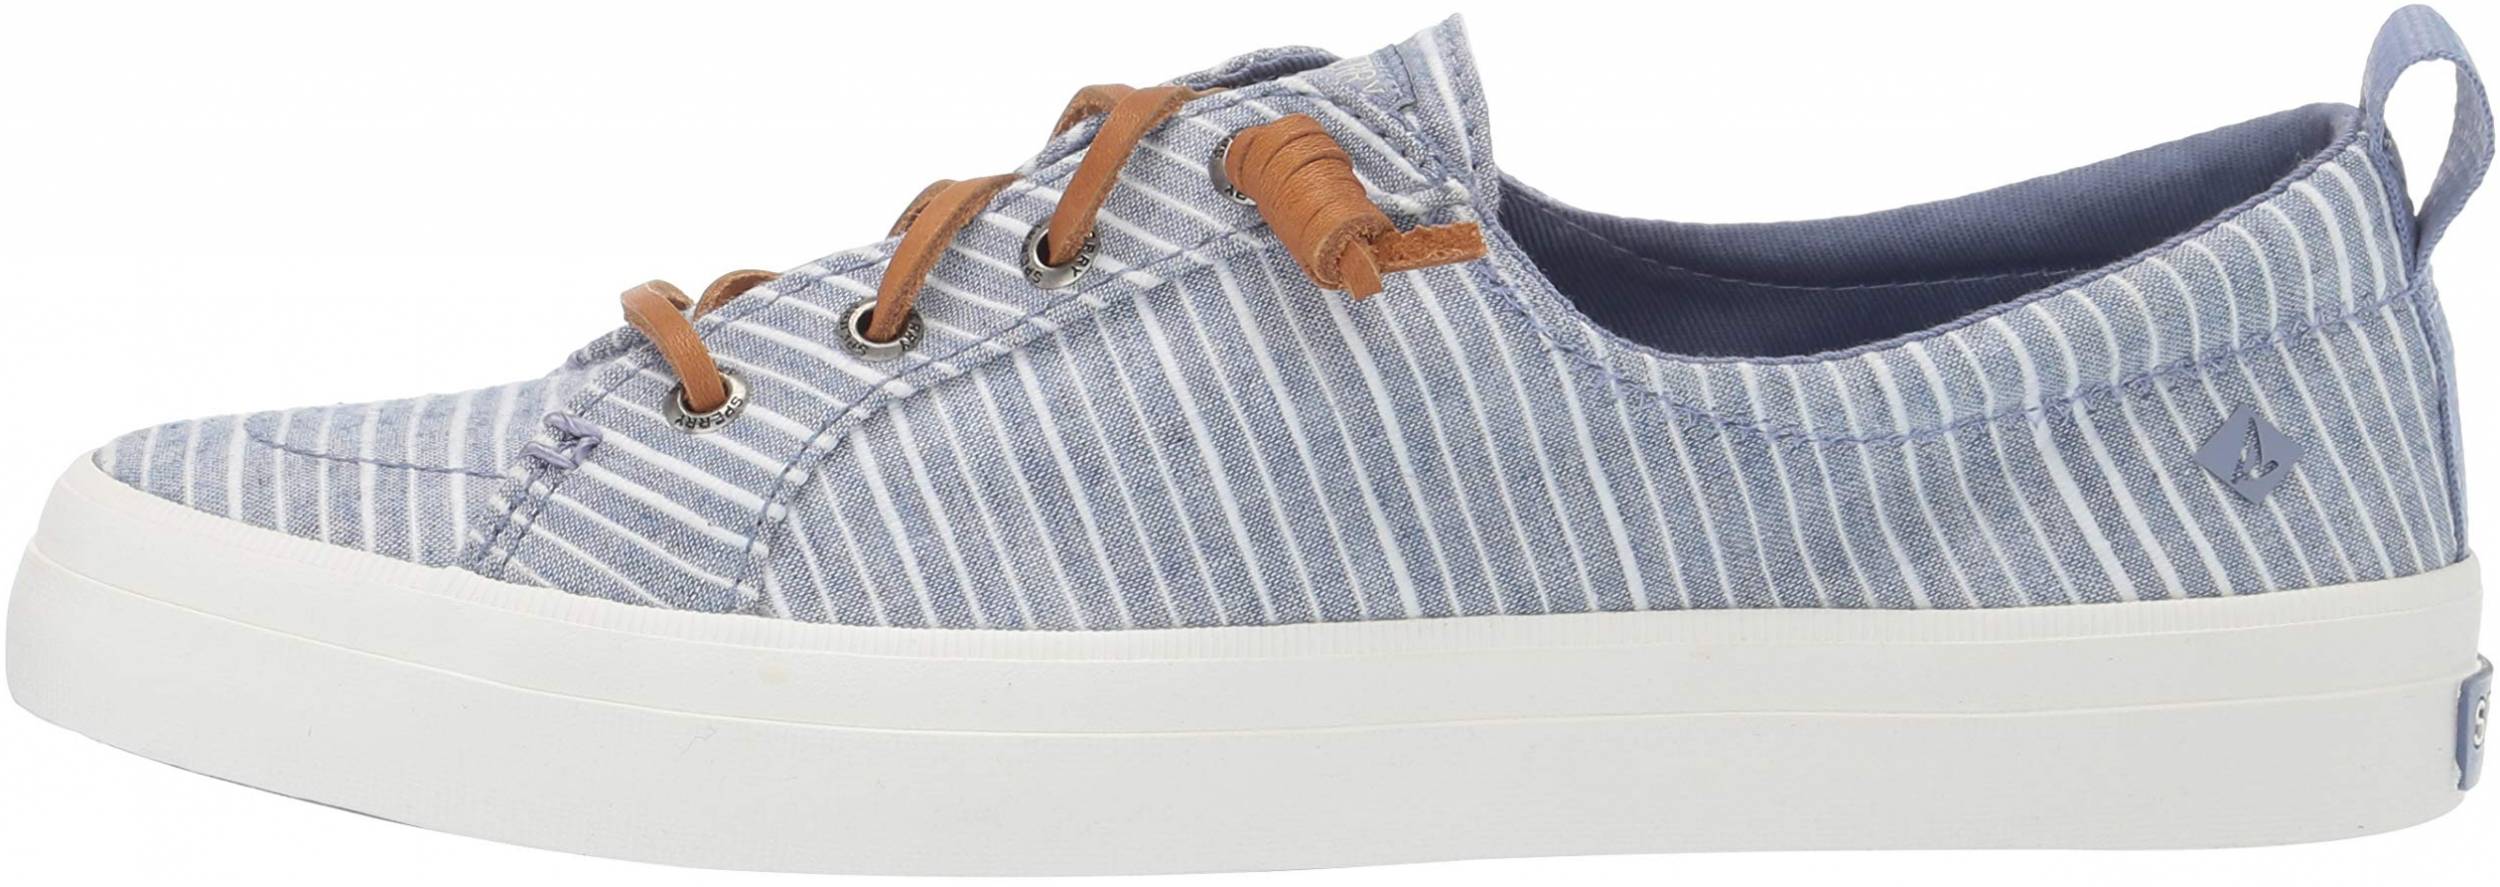 blue and white striped sperrys